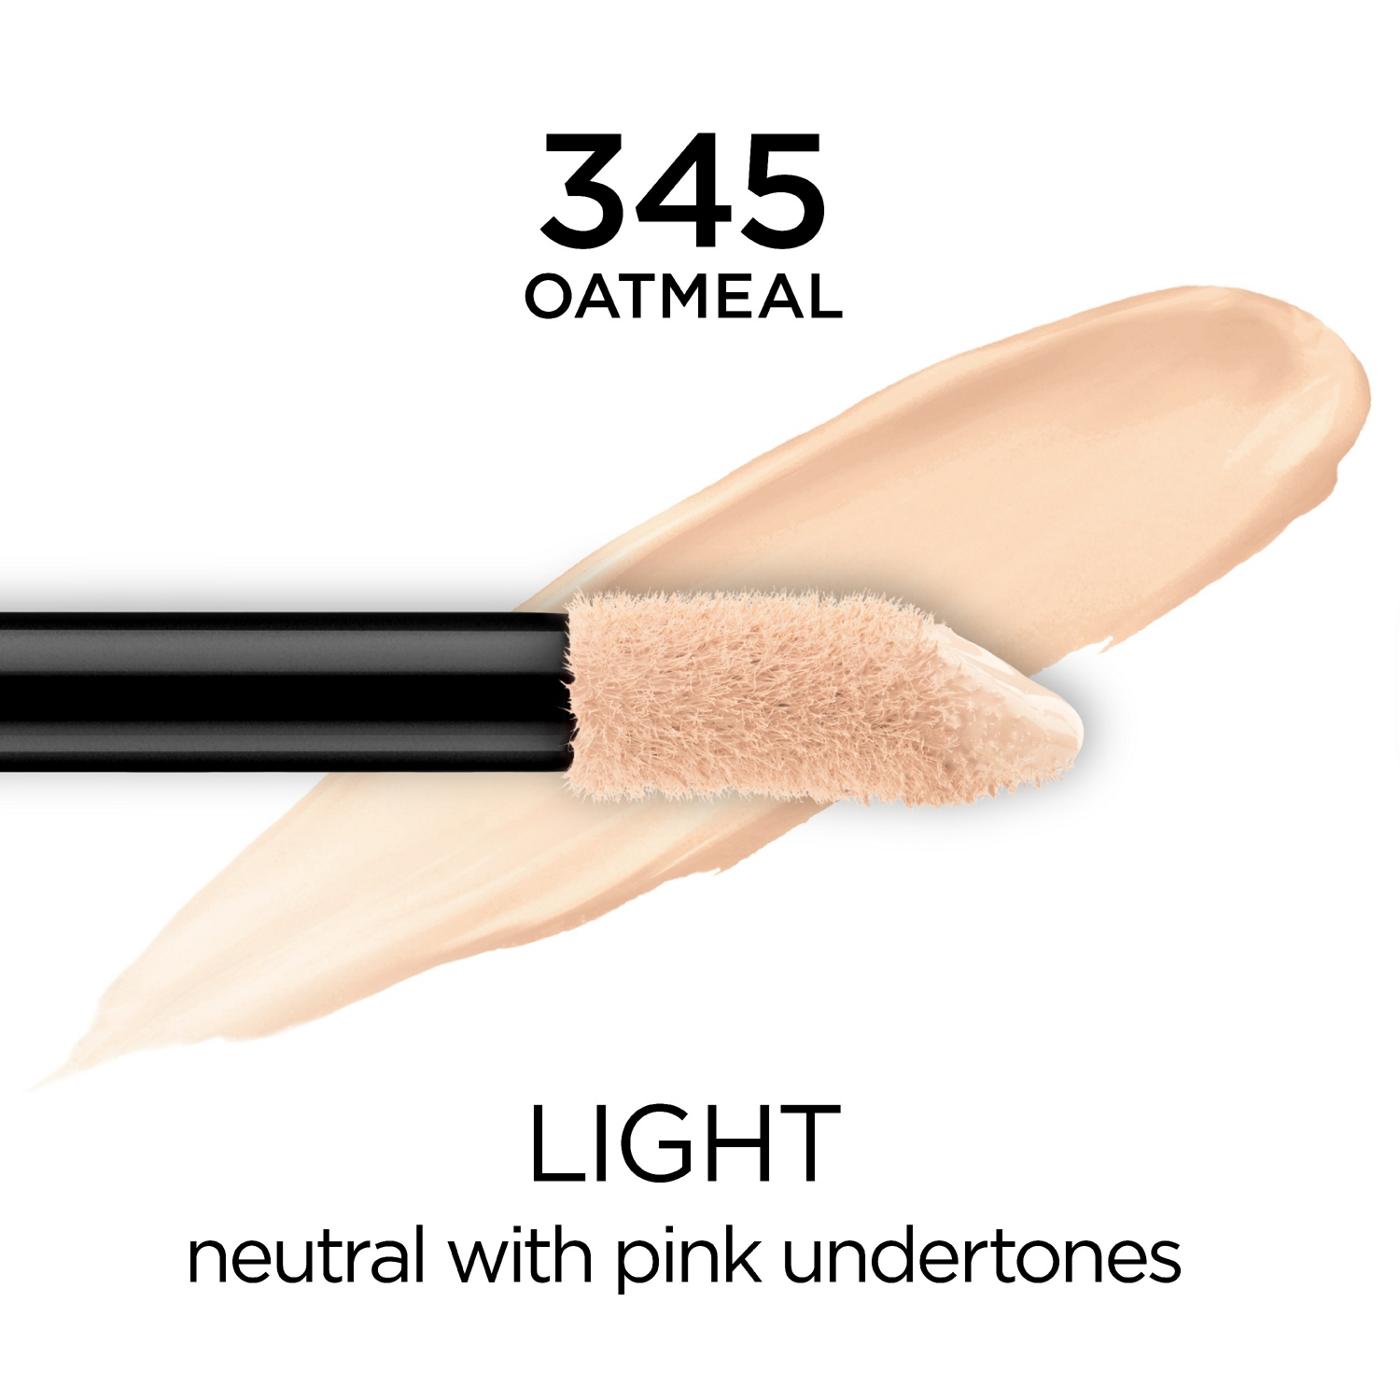 L'Oréal Paris Infallible Full Wear Concealer up to 24H Full Coverage Oatmeal; image 6 of 7